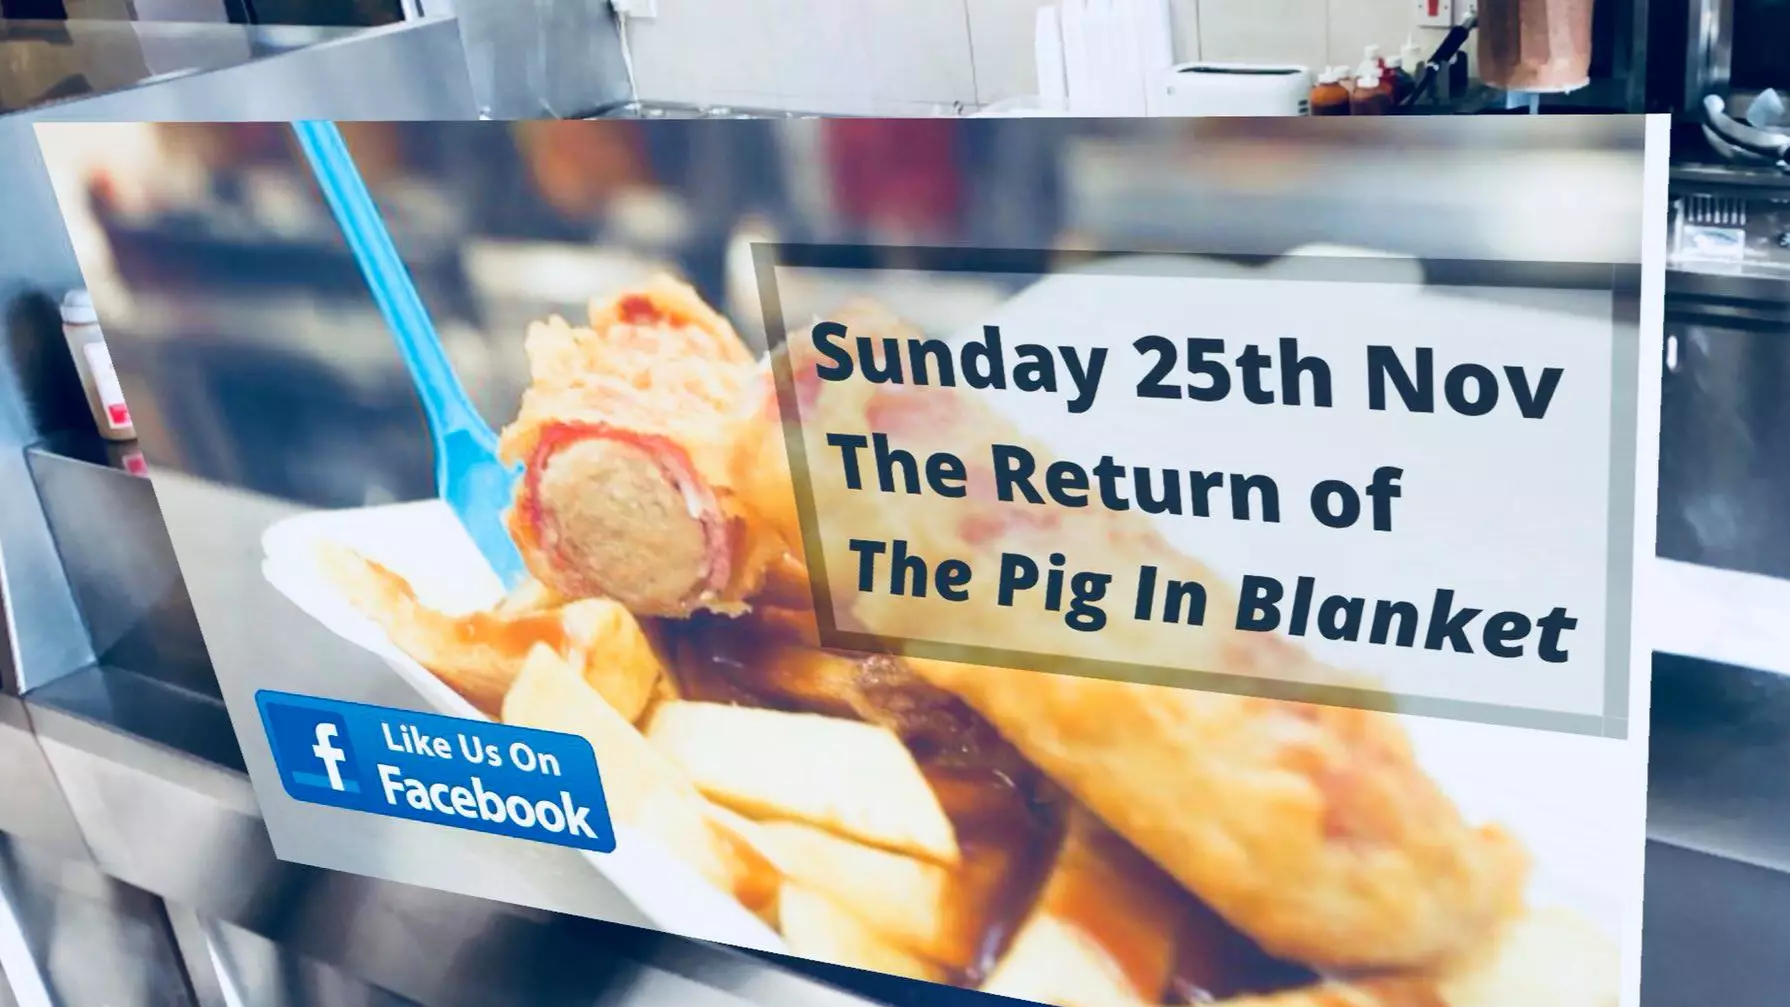 Foot-Long Battered Pigs In Blankets Are Here To Make Your Festive Dreams Come True